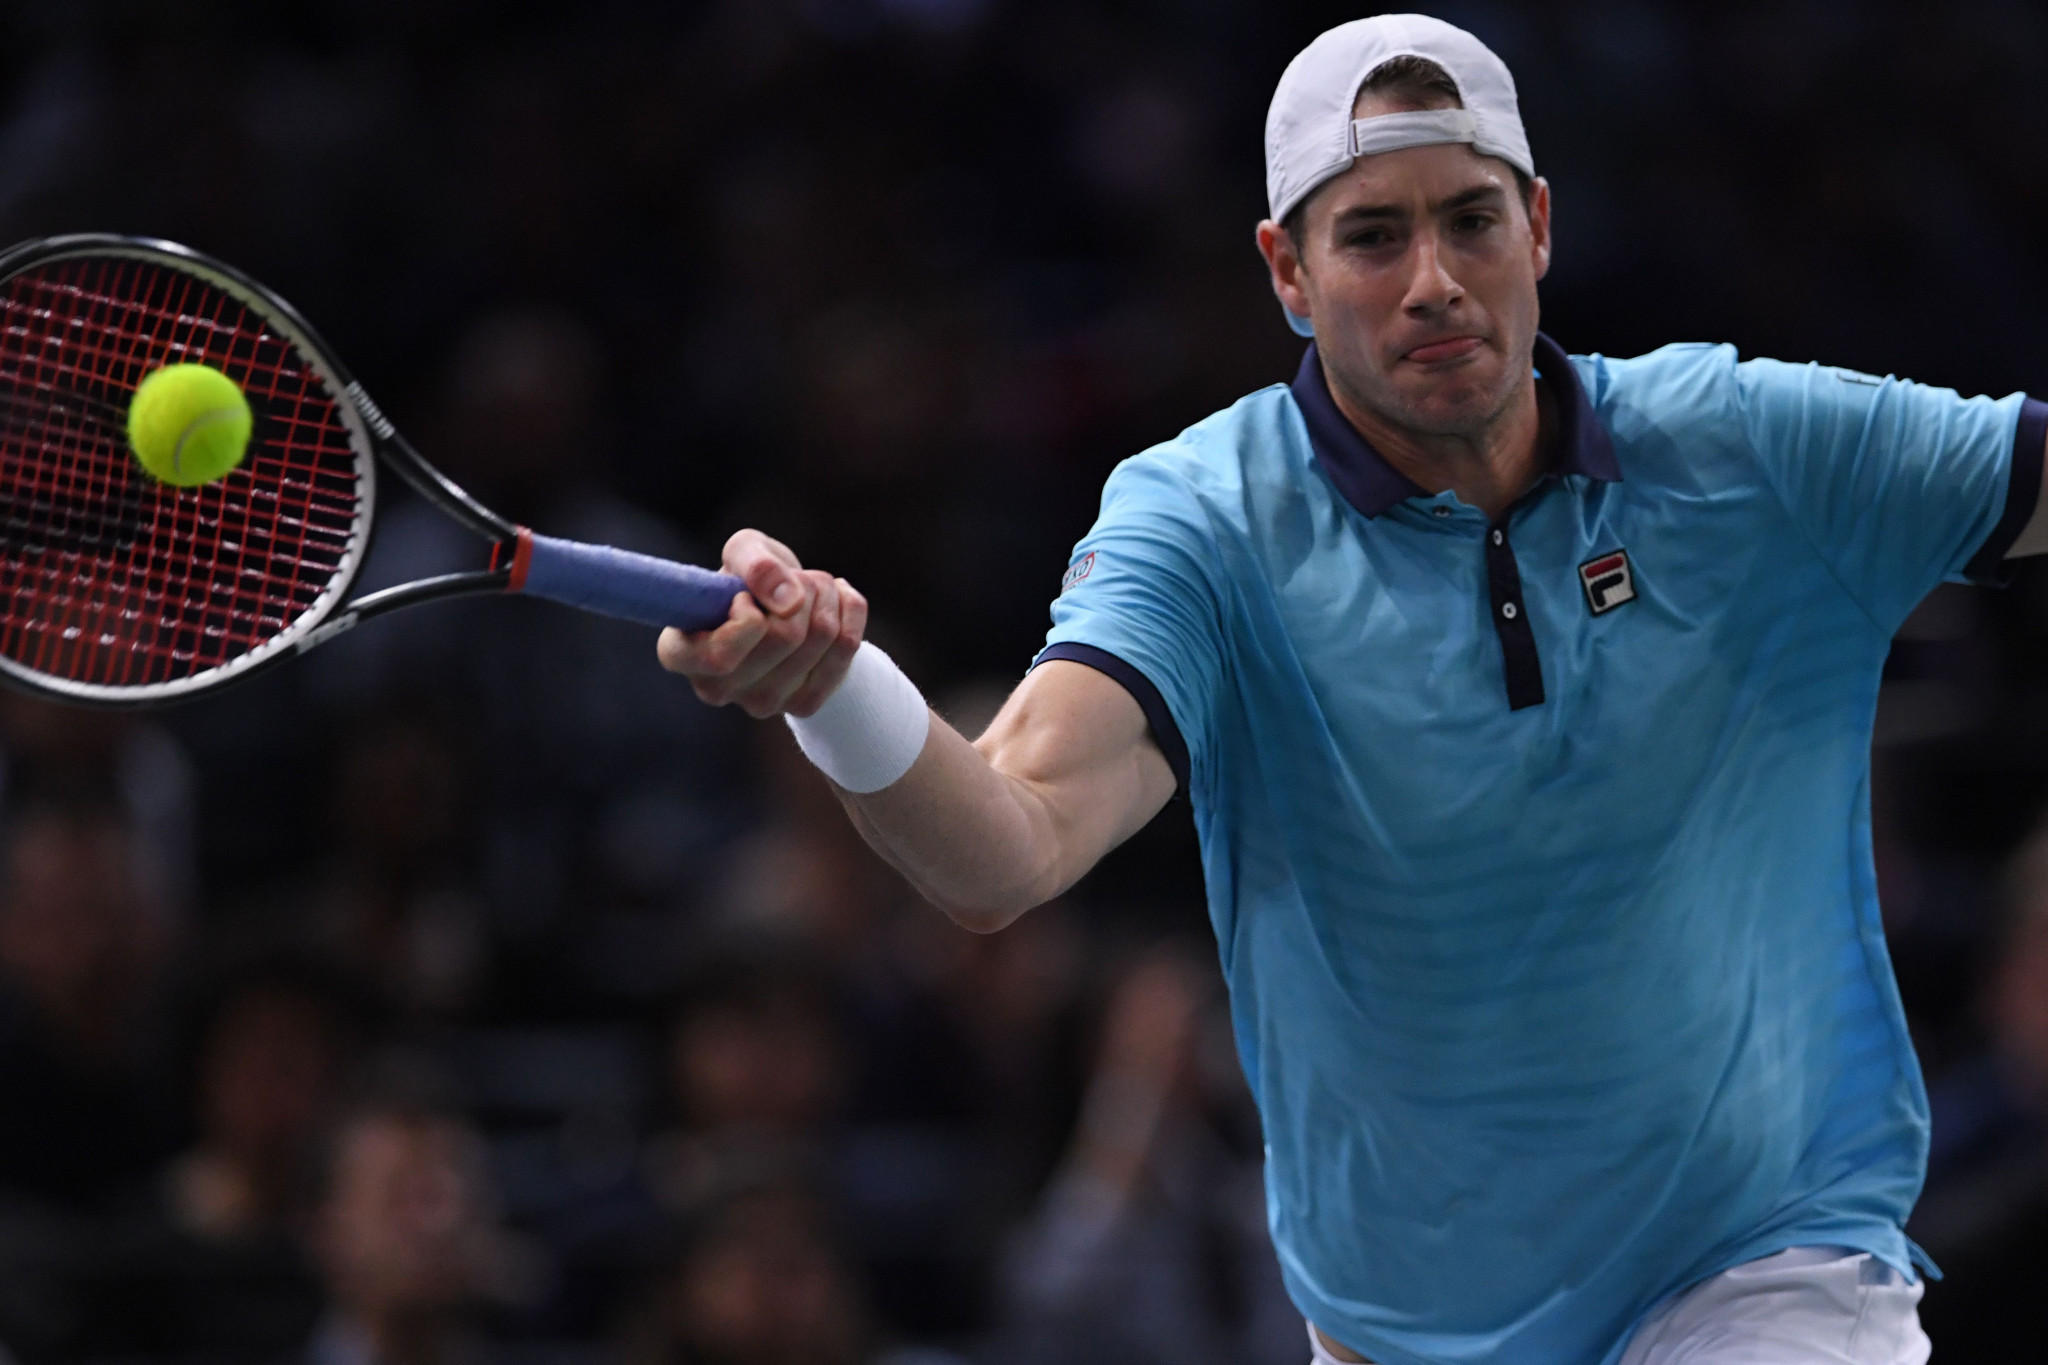 John Isner of the United States beat Juan Martin del Potro to reach the semi-finals in Paris ©Getty Images